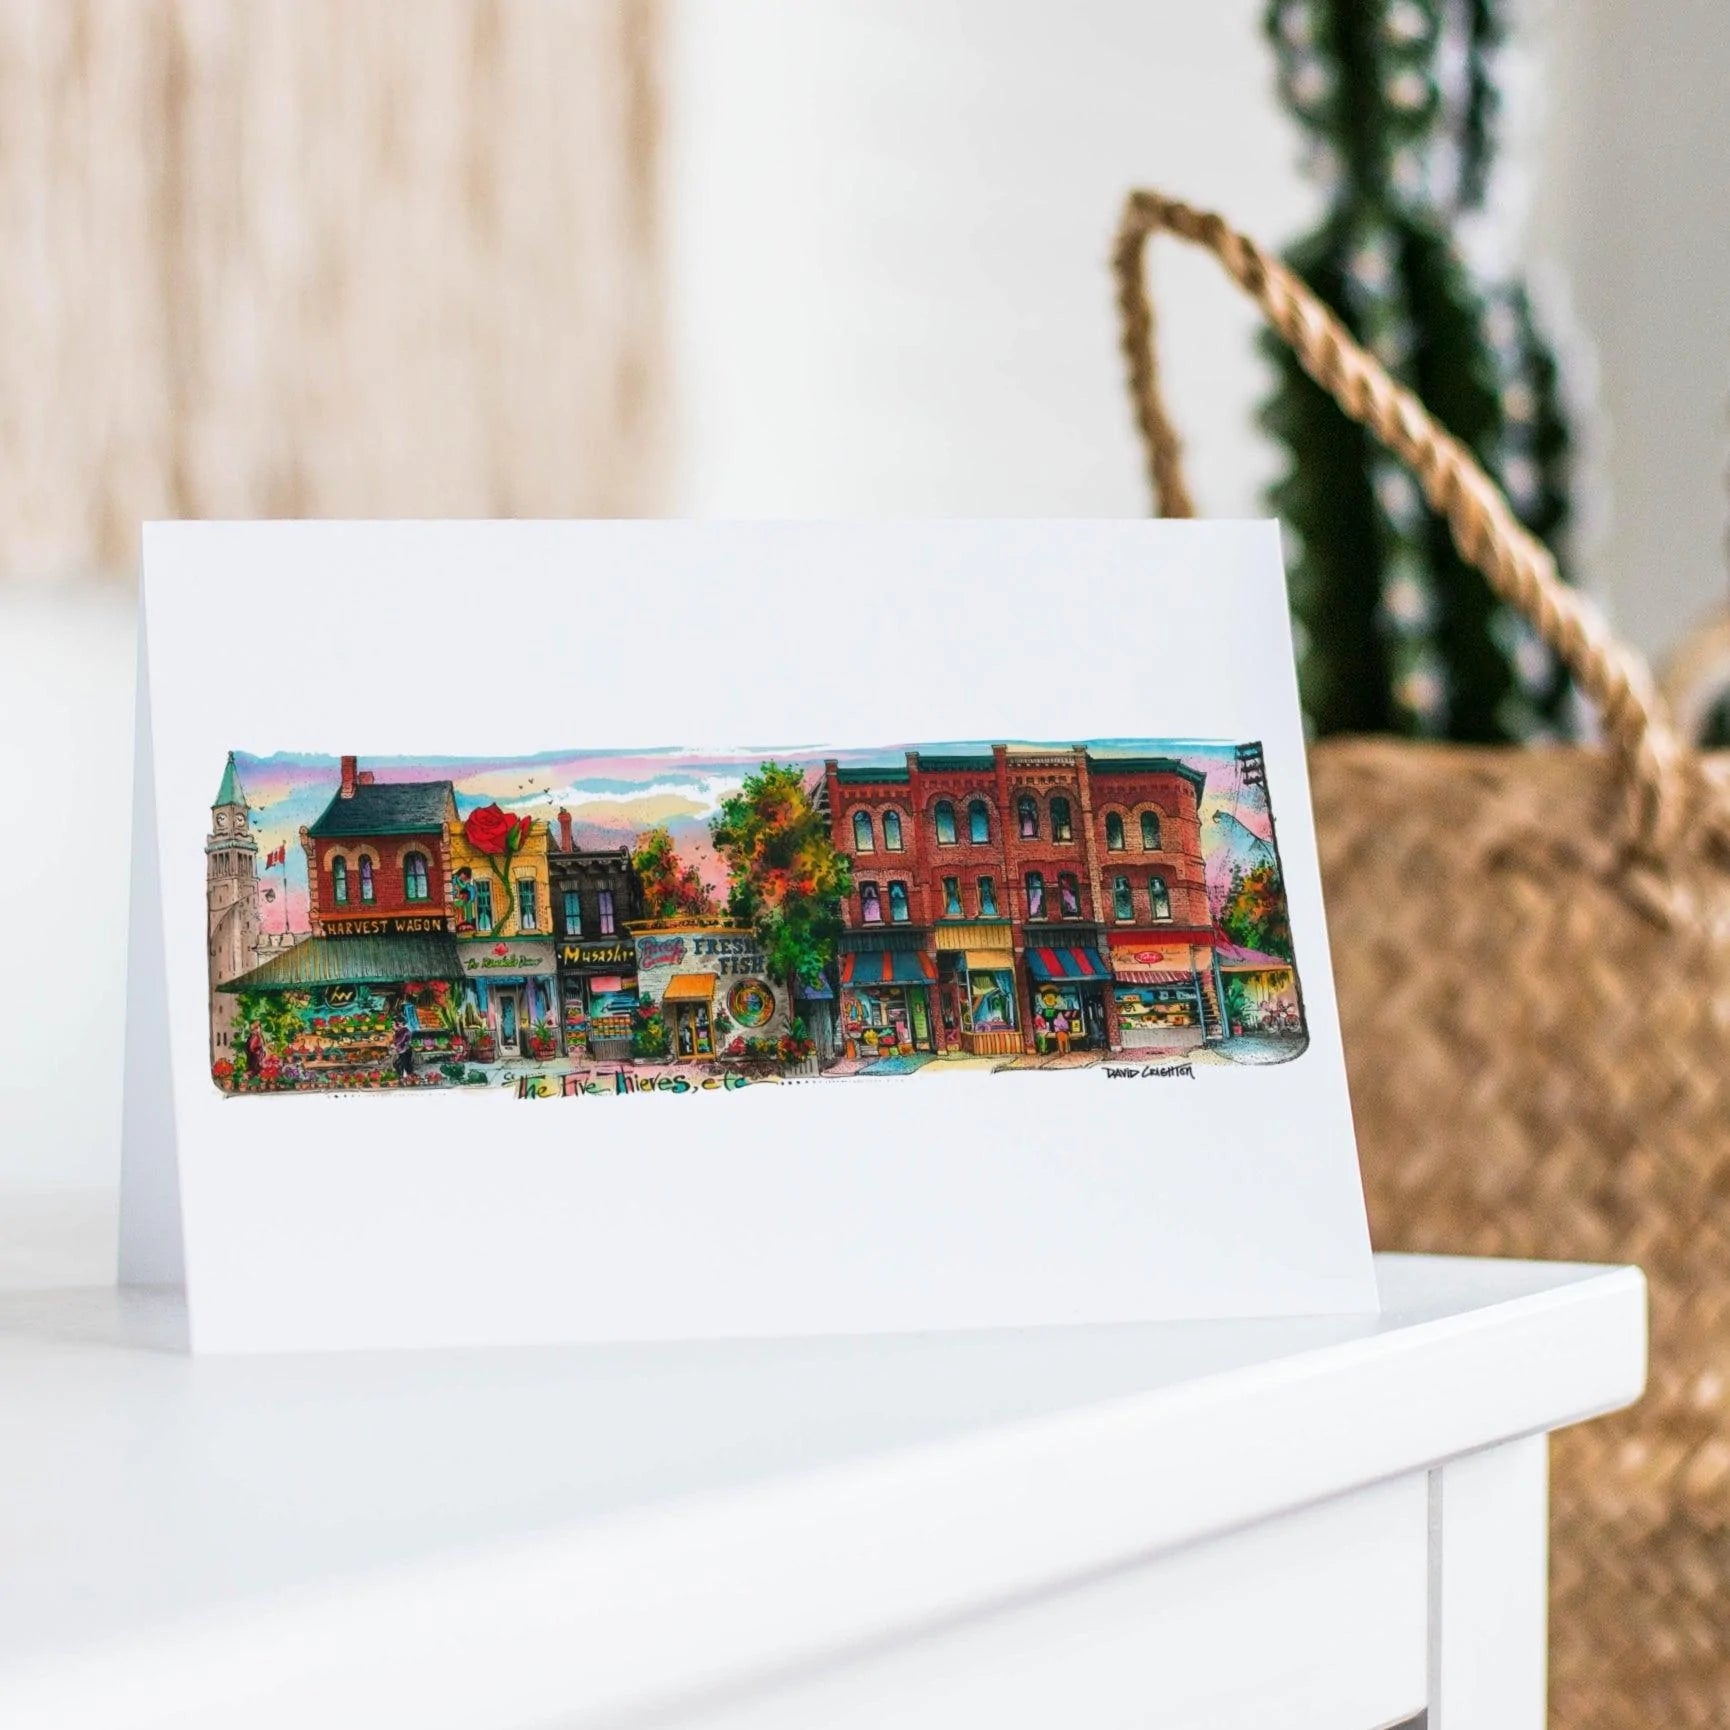 The Five Thieves City Art Greeting Card | Totally Toronto Art Inc. 